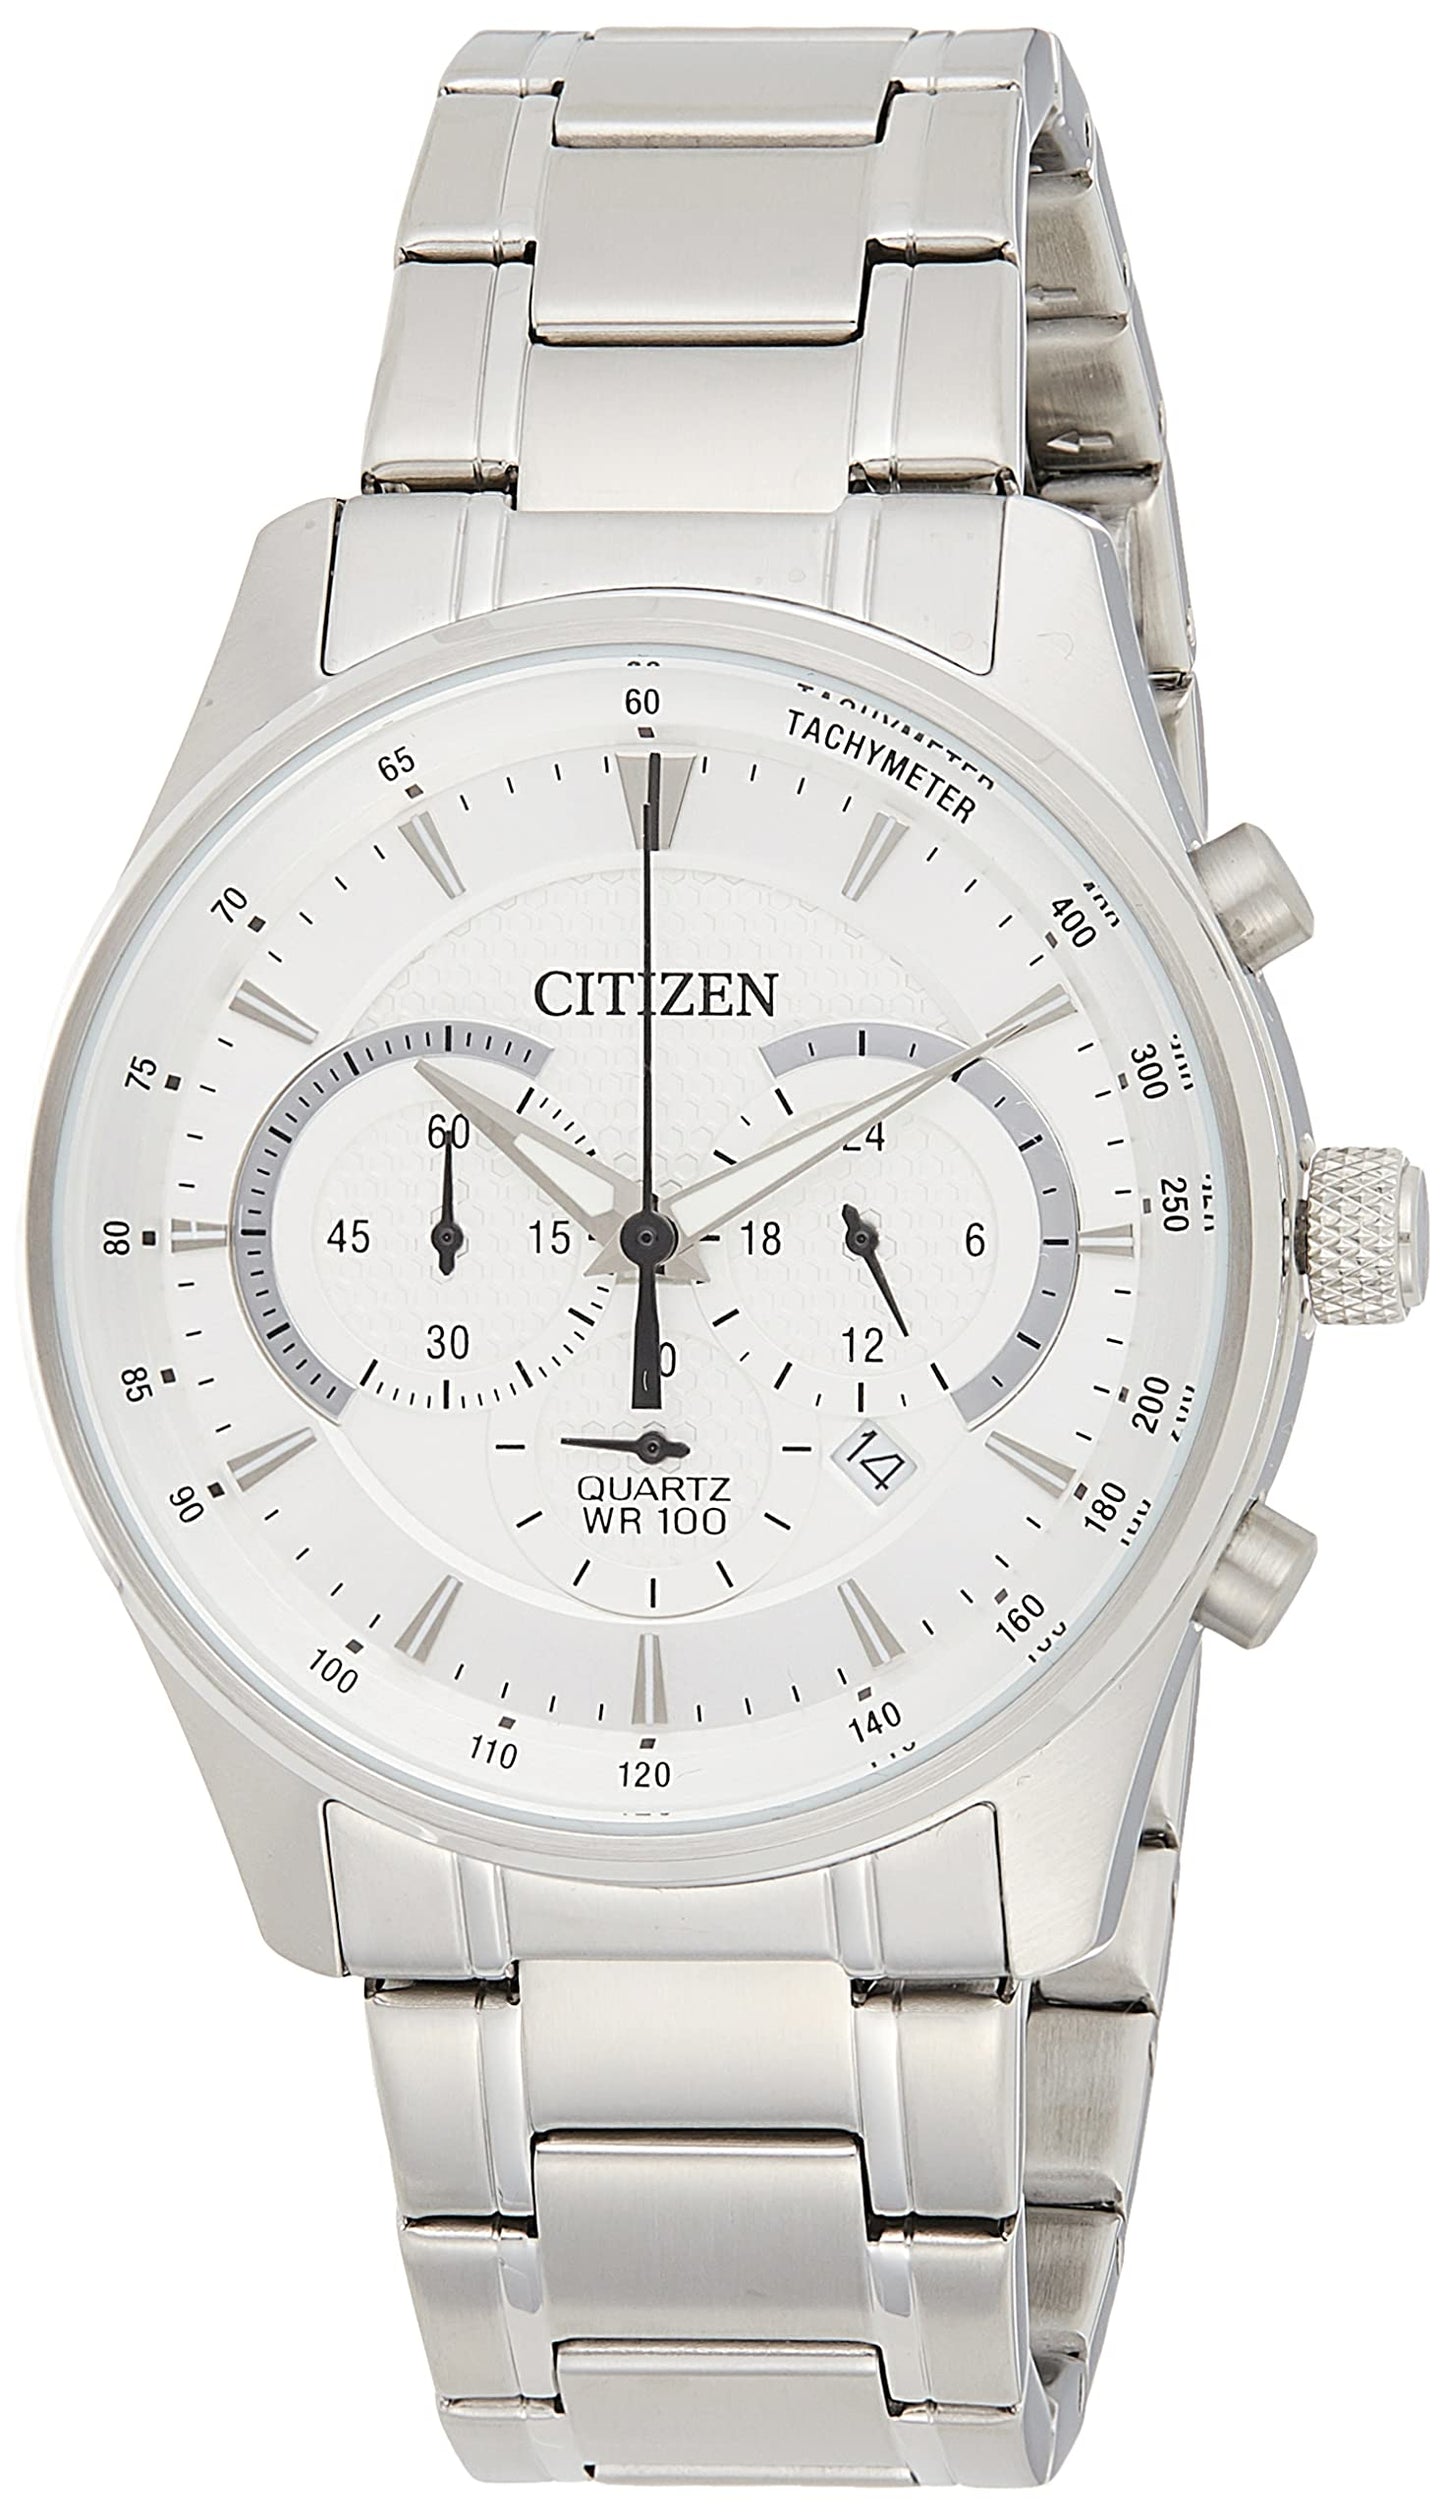 Citizen mens quartz watch, chronograph display and stainless steel strap - an8190-51a